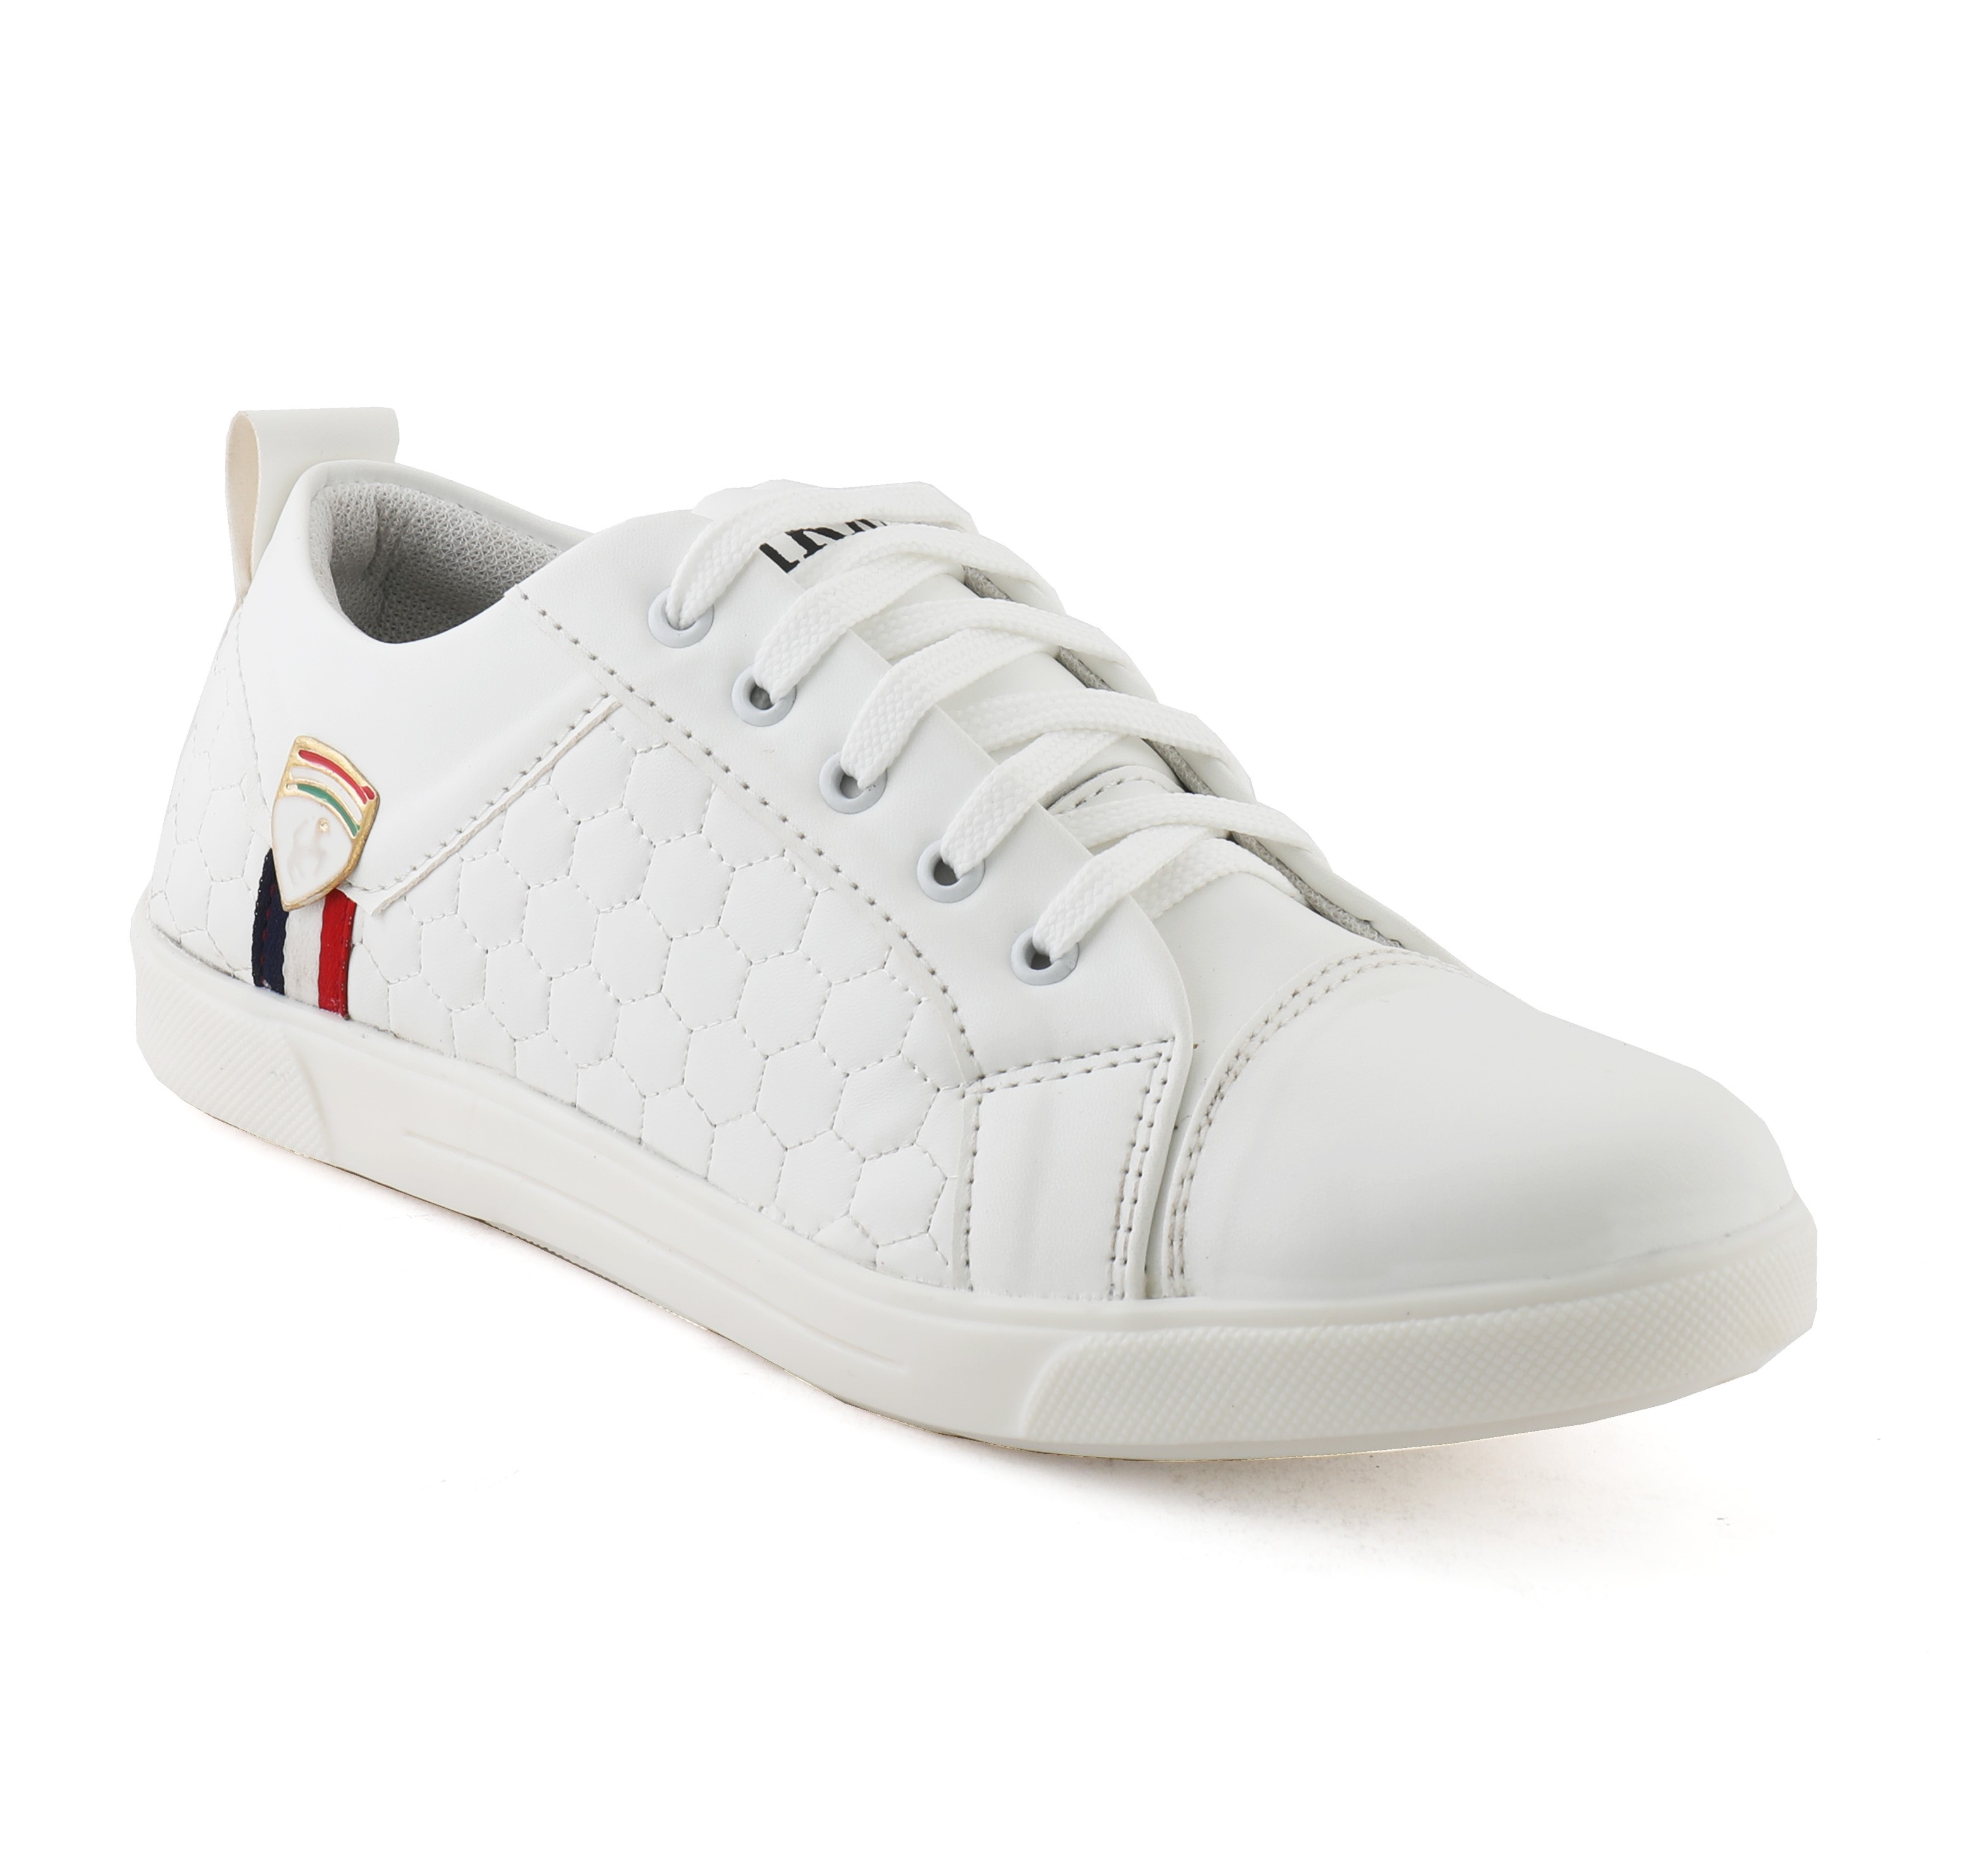 Buy Shoe Hub Men's White Lace-up Sneakers Online @ ₹699 from ShopClues